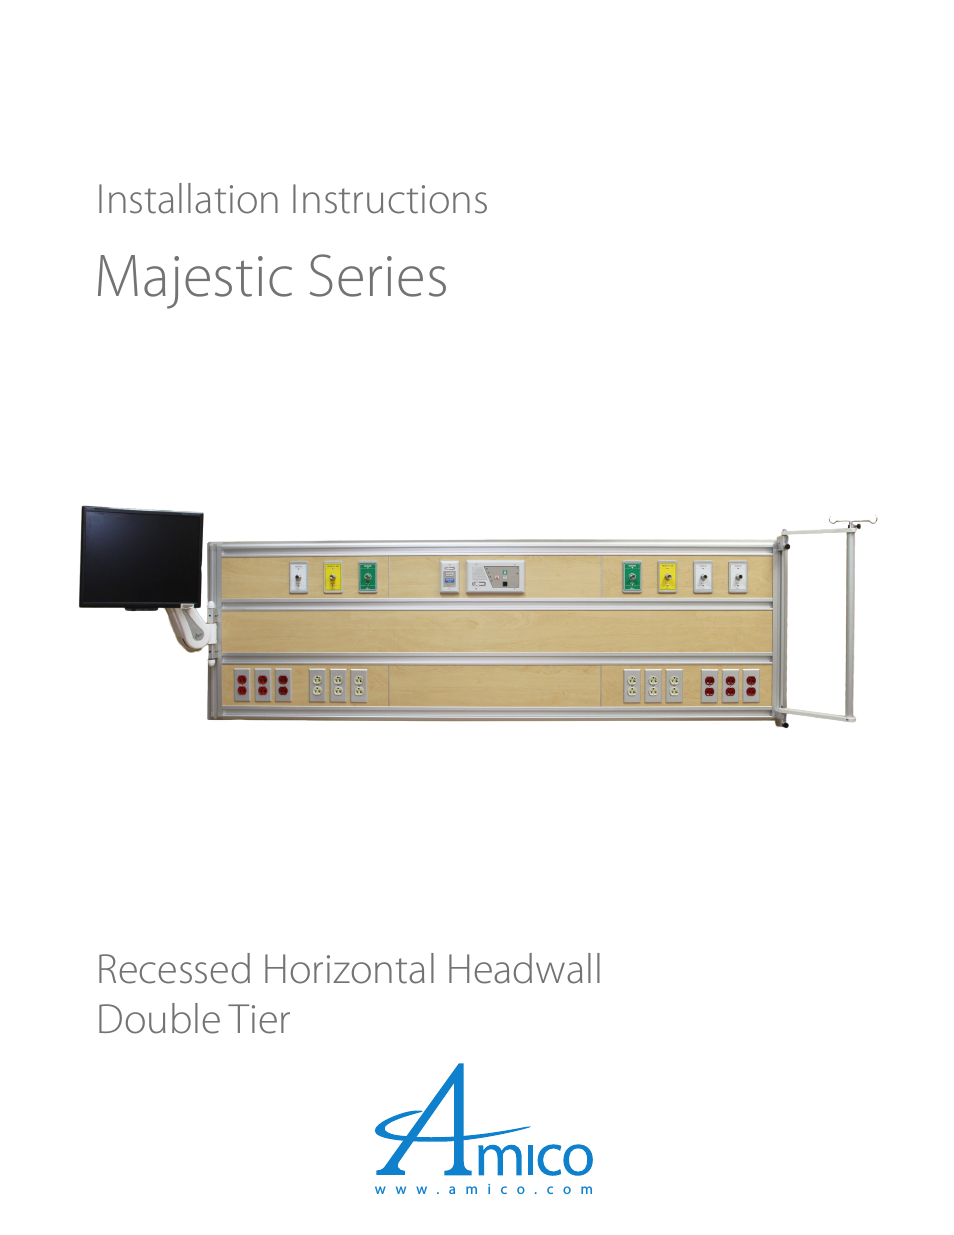 Majestic Series Double Tier Recessed Headwall